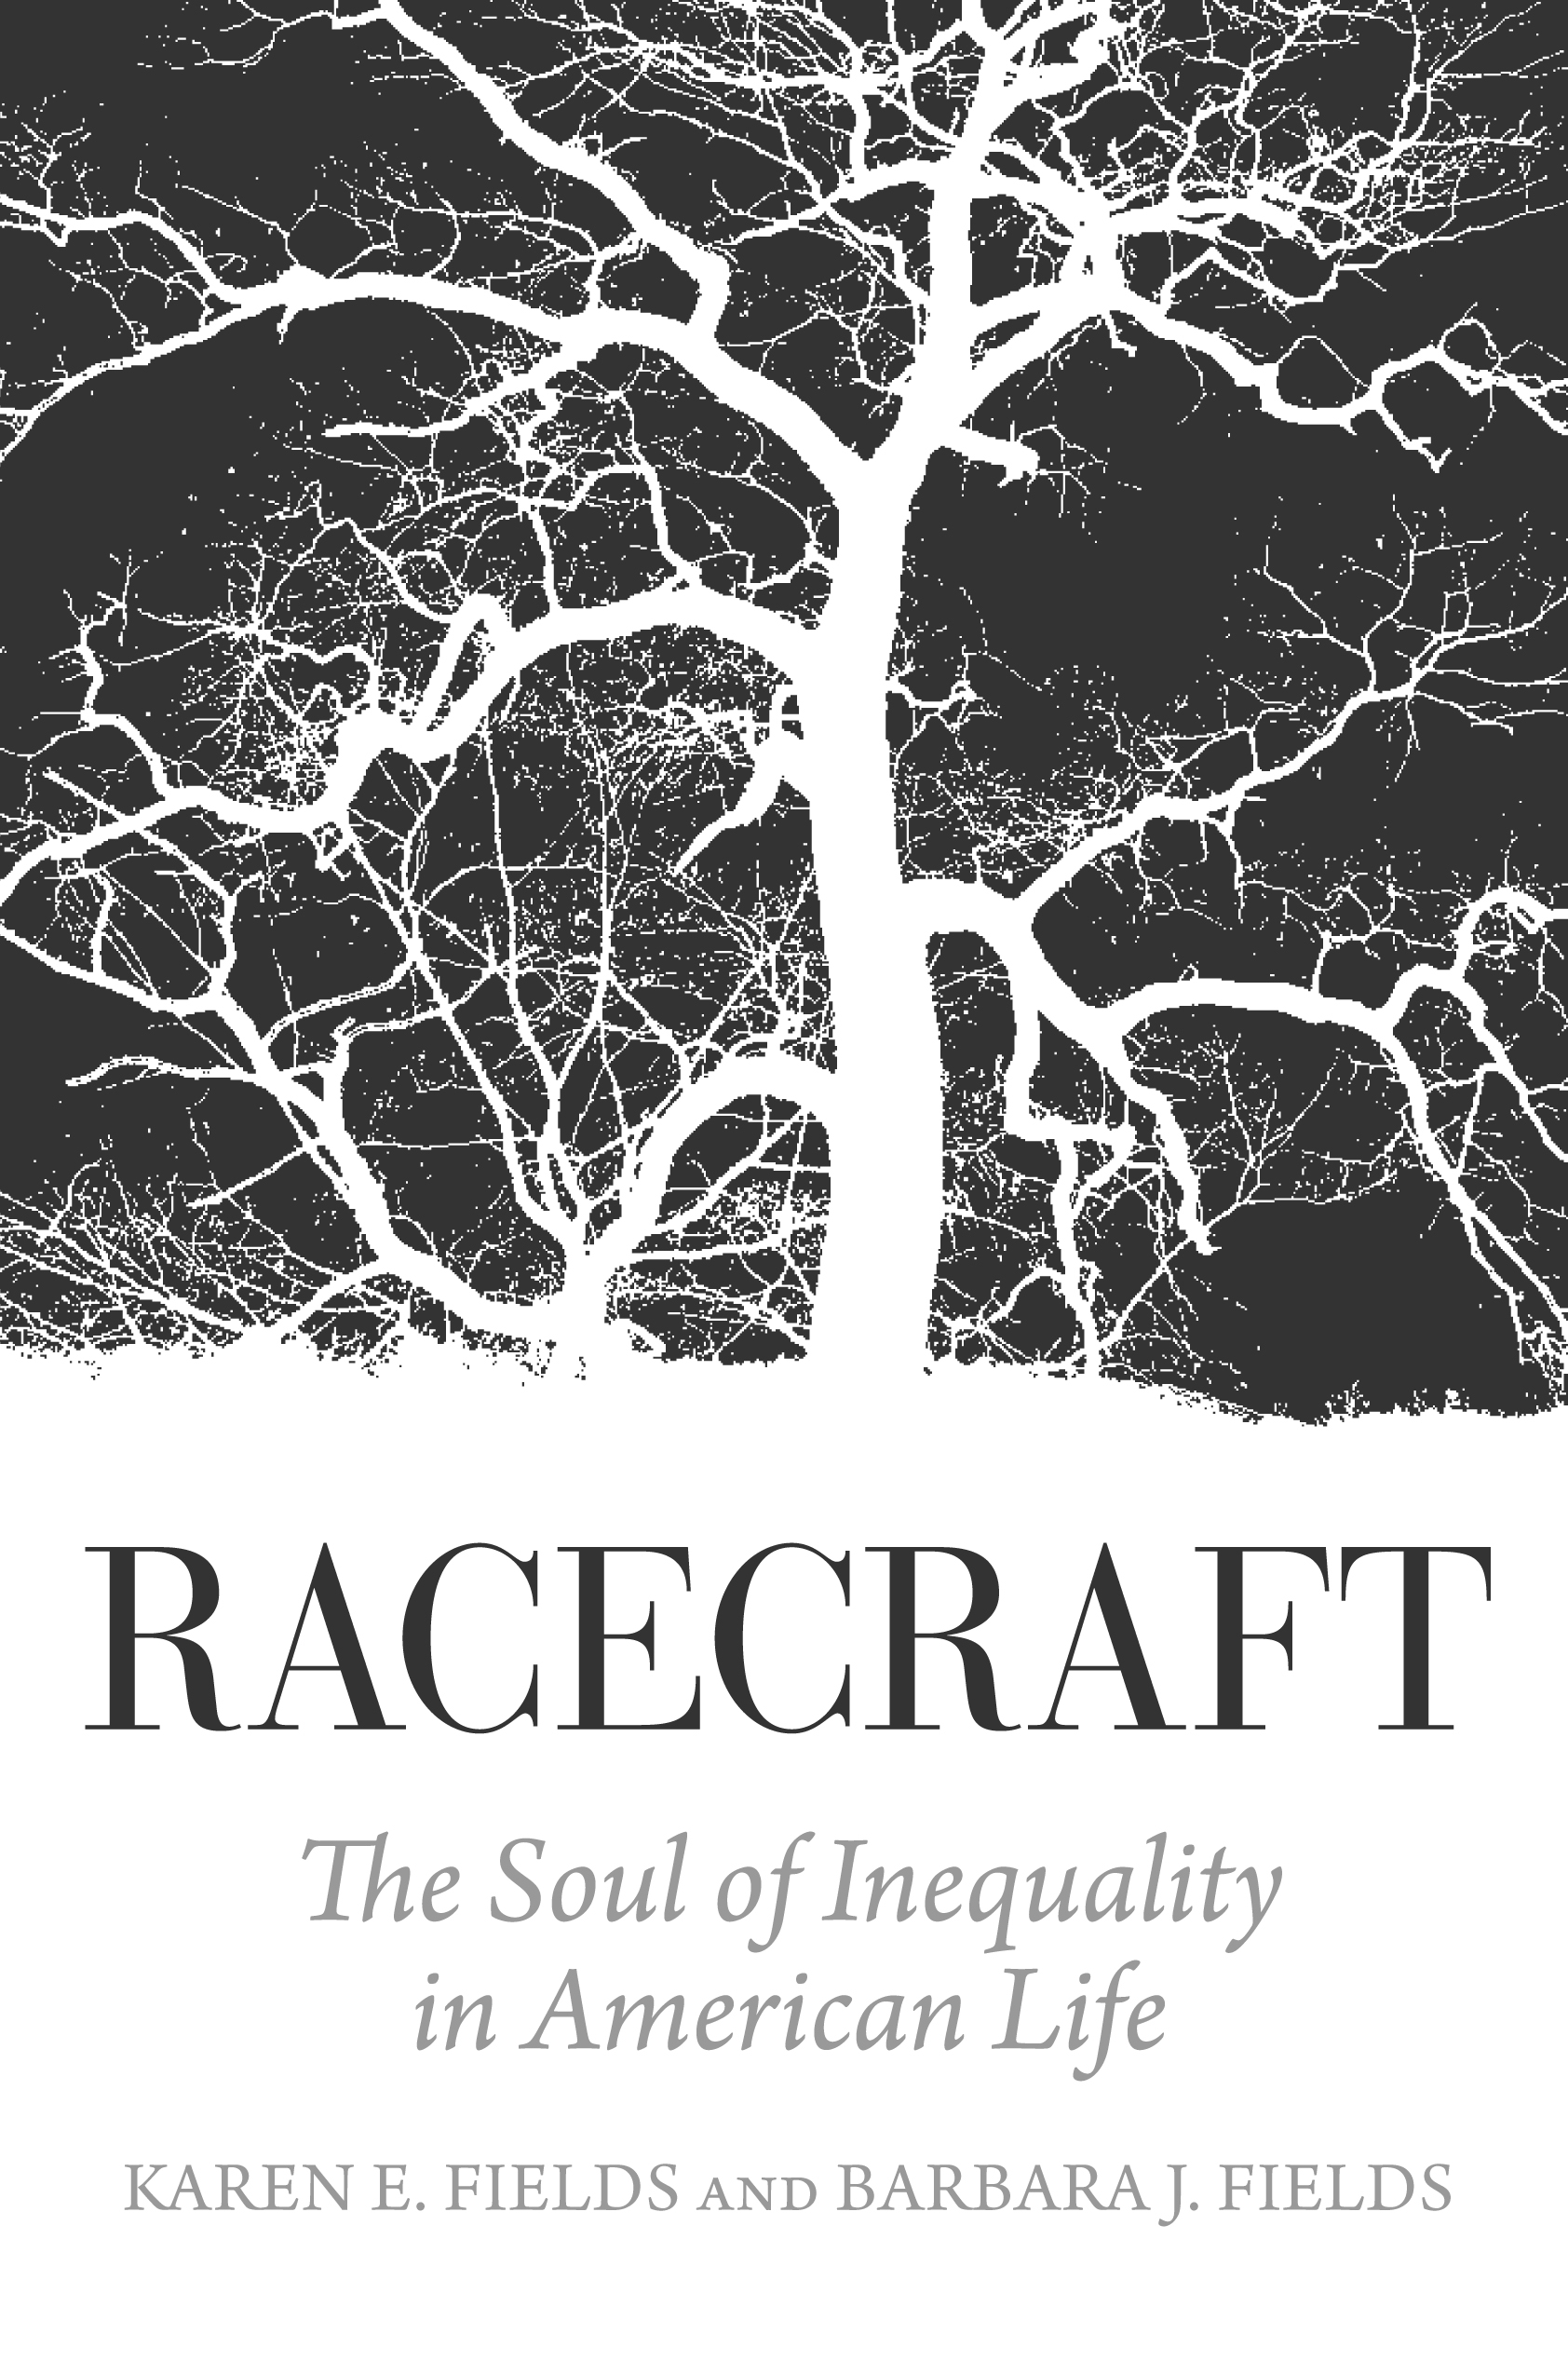 Karen E. Fields and Barbara J. Fields, Racecraft: The Soul of Inequality in American Life